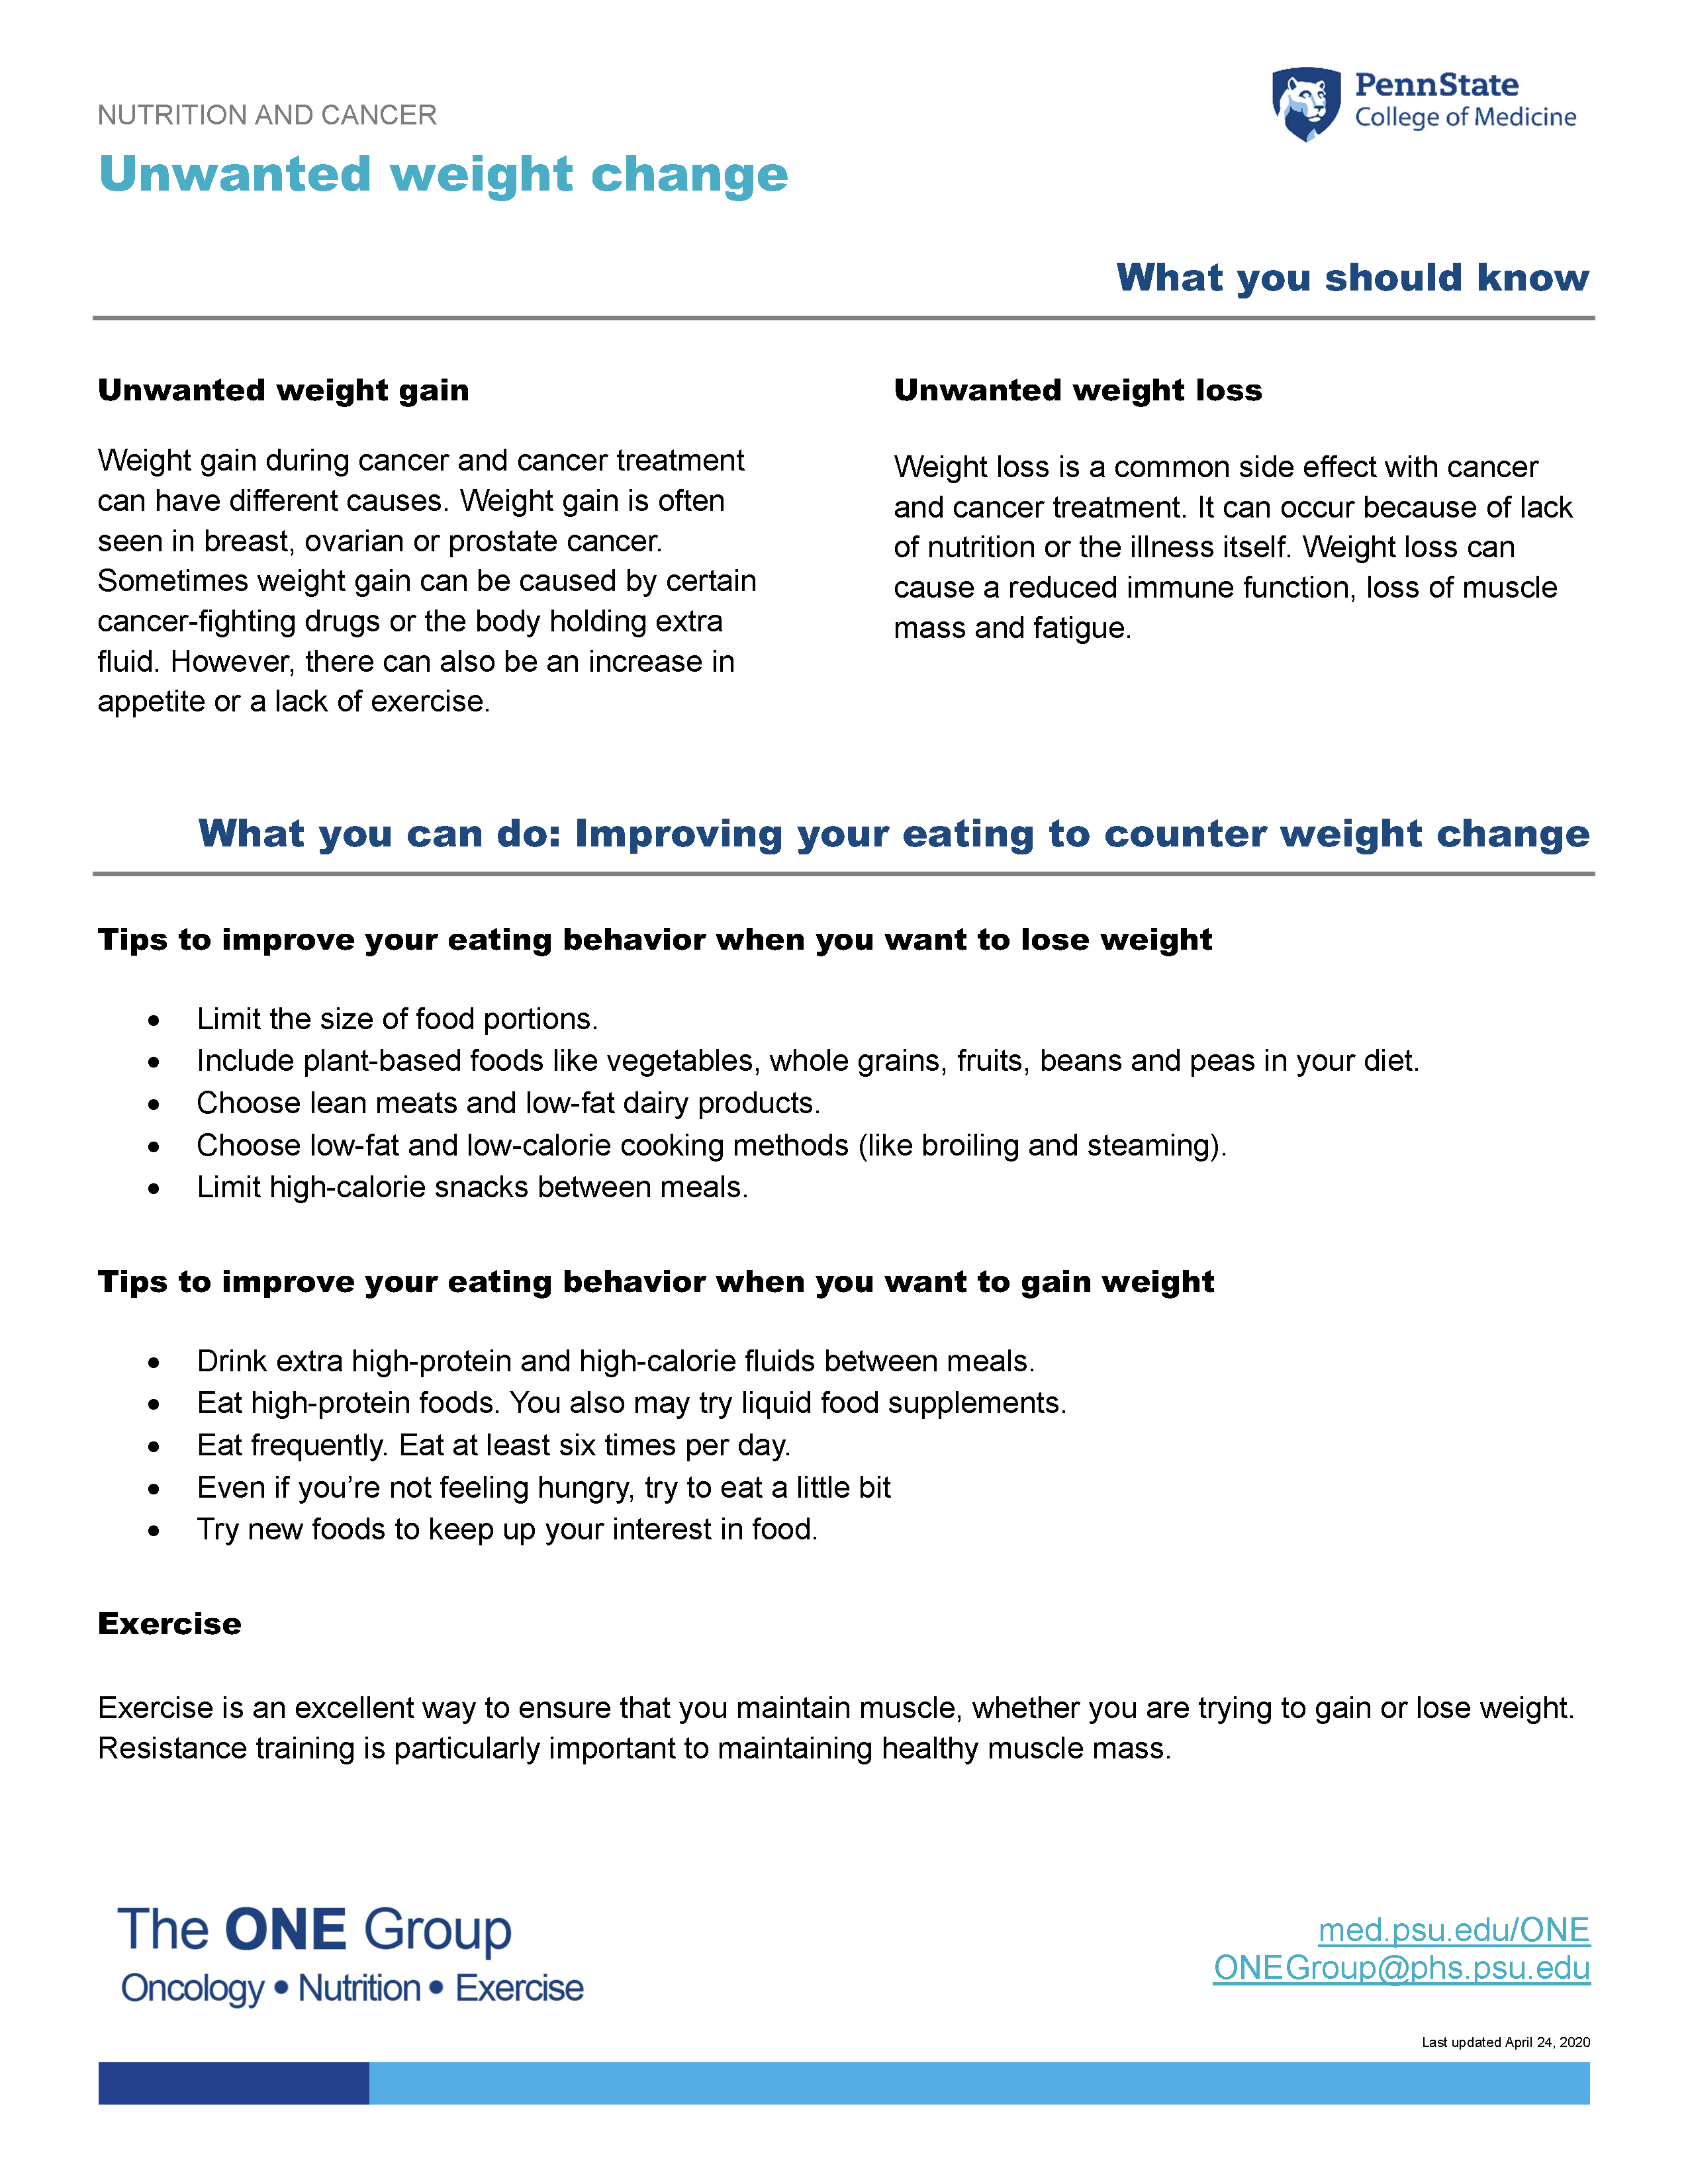 The unwanted weight change guide from The ONE Group includes the information on this page, formatted for print.